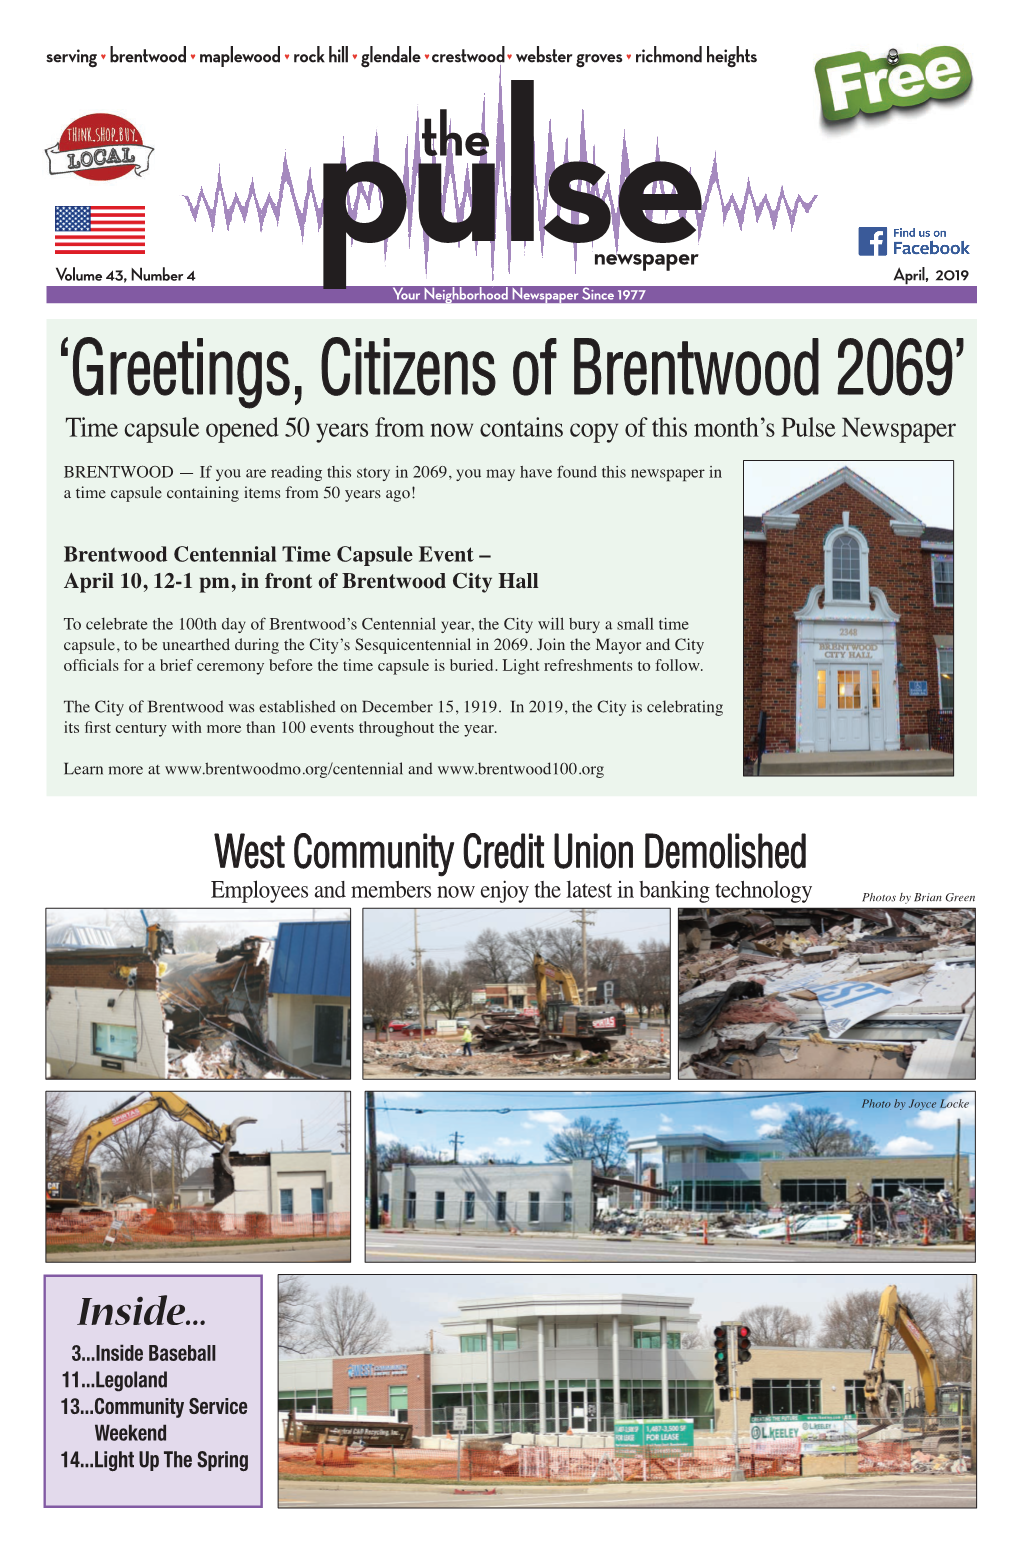 'Greetings, Citizens of Brentwood 2069'